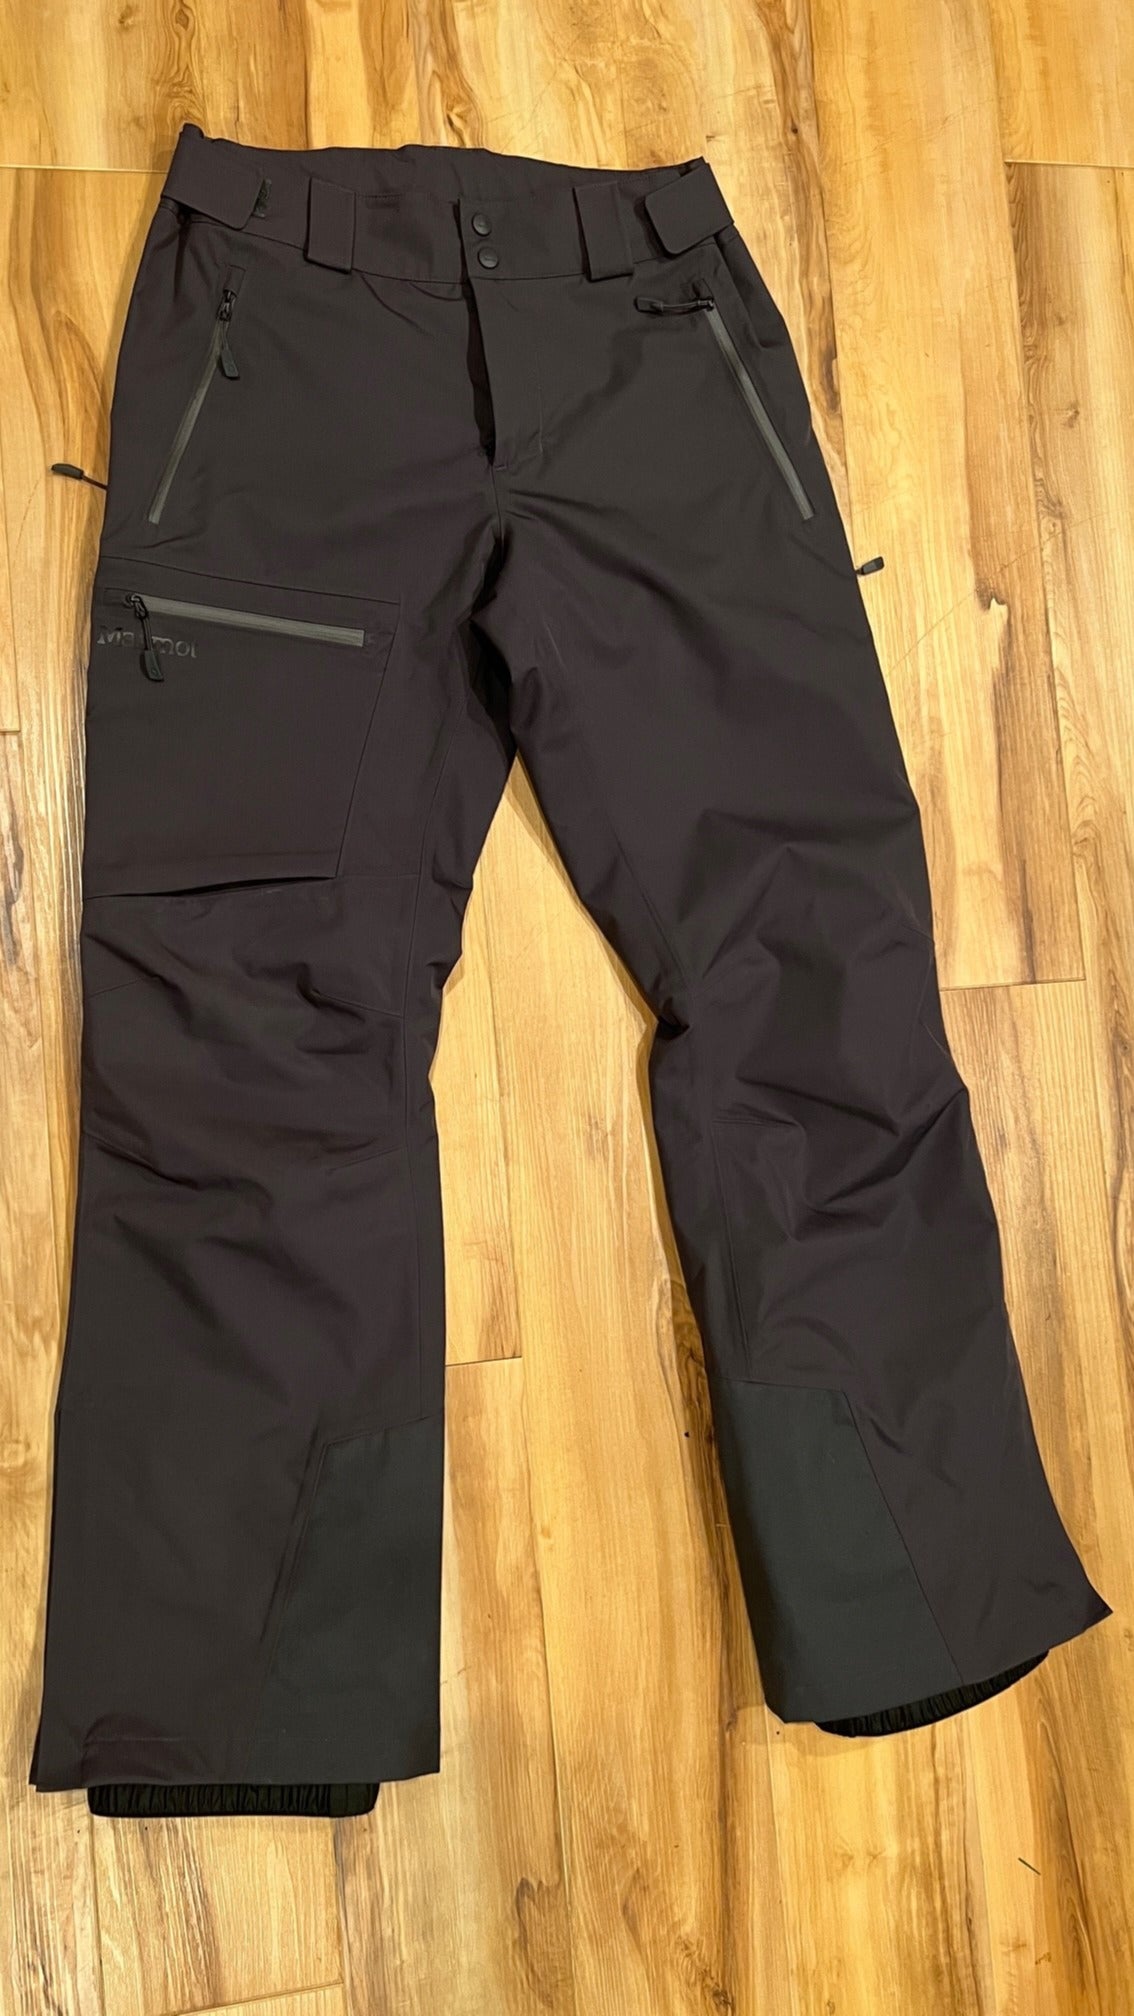 Marmot Refuge Pant - Men's | Outdoor Clothing & Gear For Skiing, Camping  And Climbing